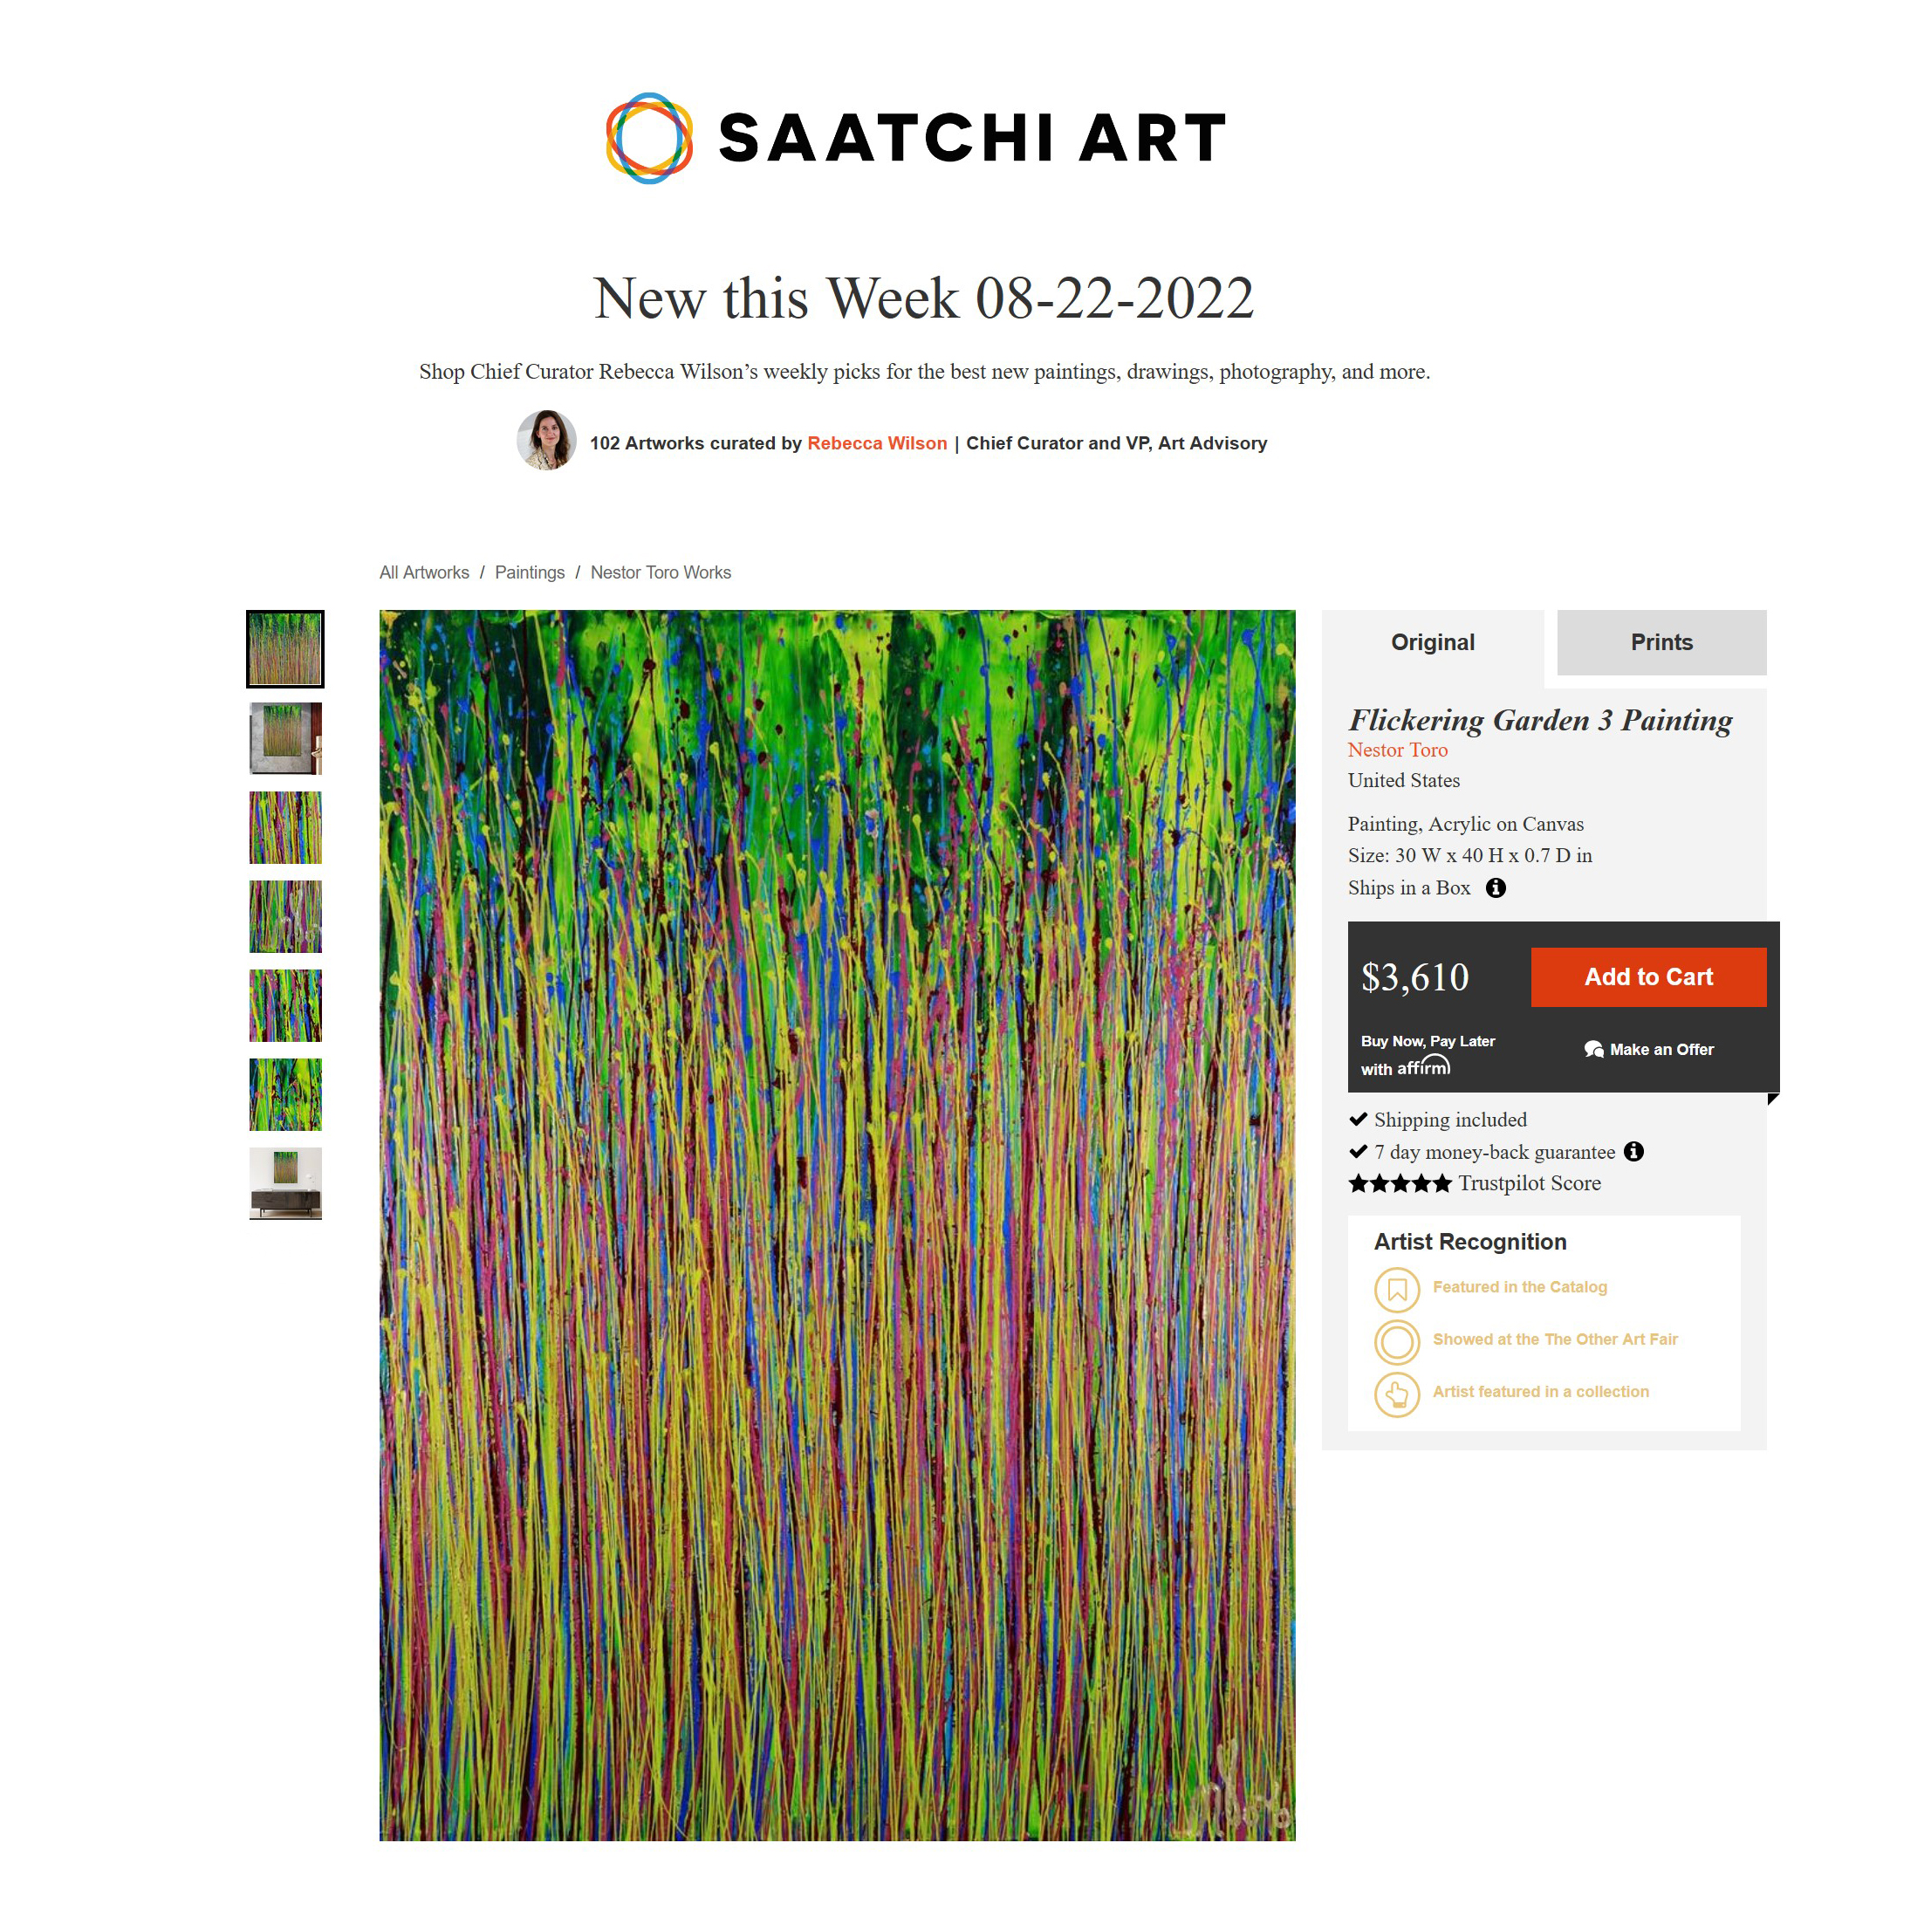 Saatchi Art - New This Week Collection - Aug 22, 2022 featuring Nestor Toro's painting "Flickering Garden 3" 30x40 inches